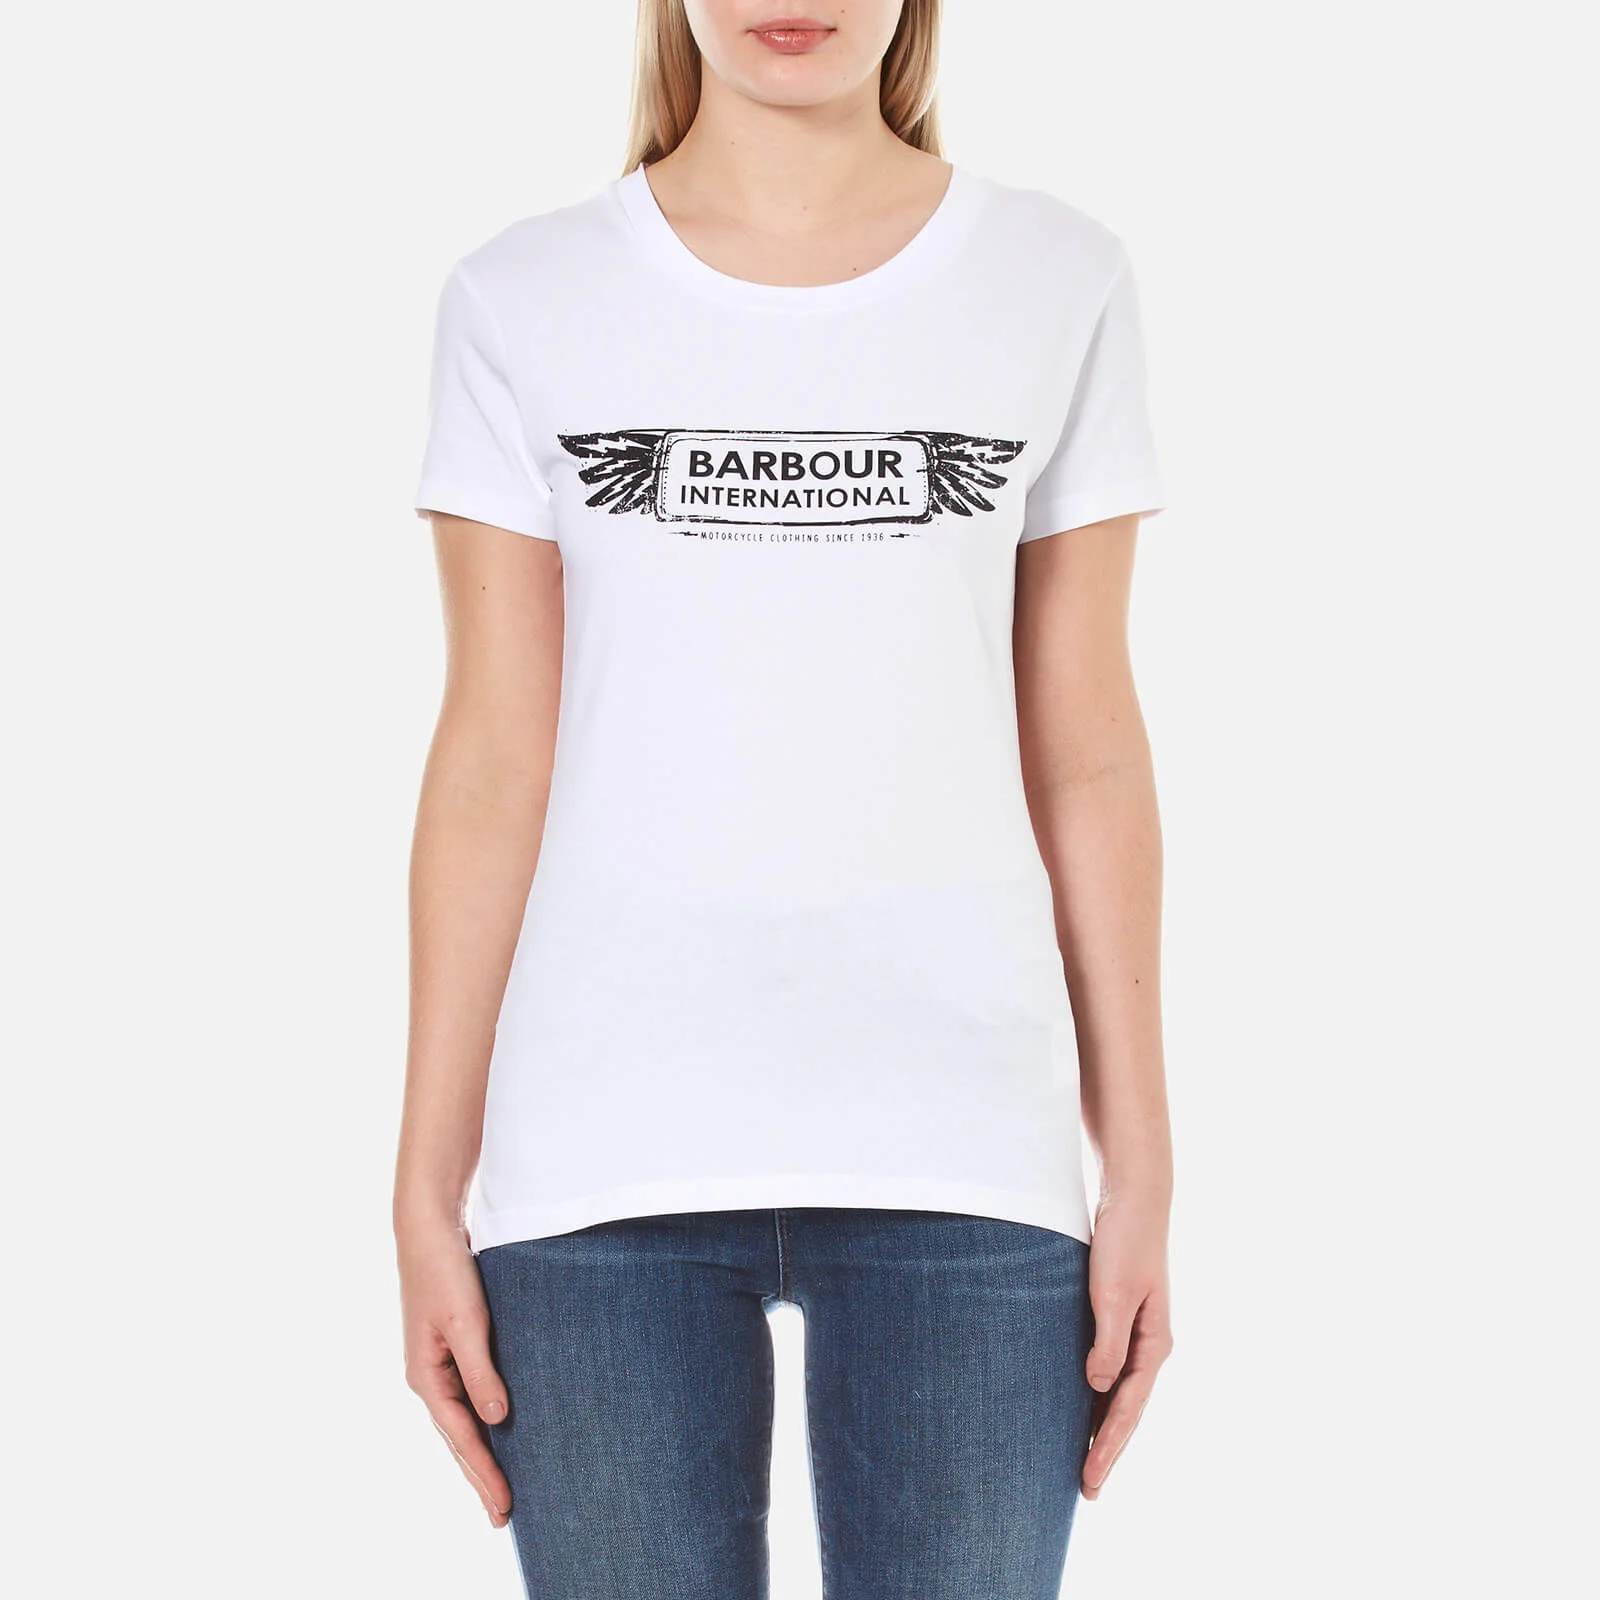 Barbour International Women's Cable T-Shirt - White Image 1